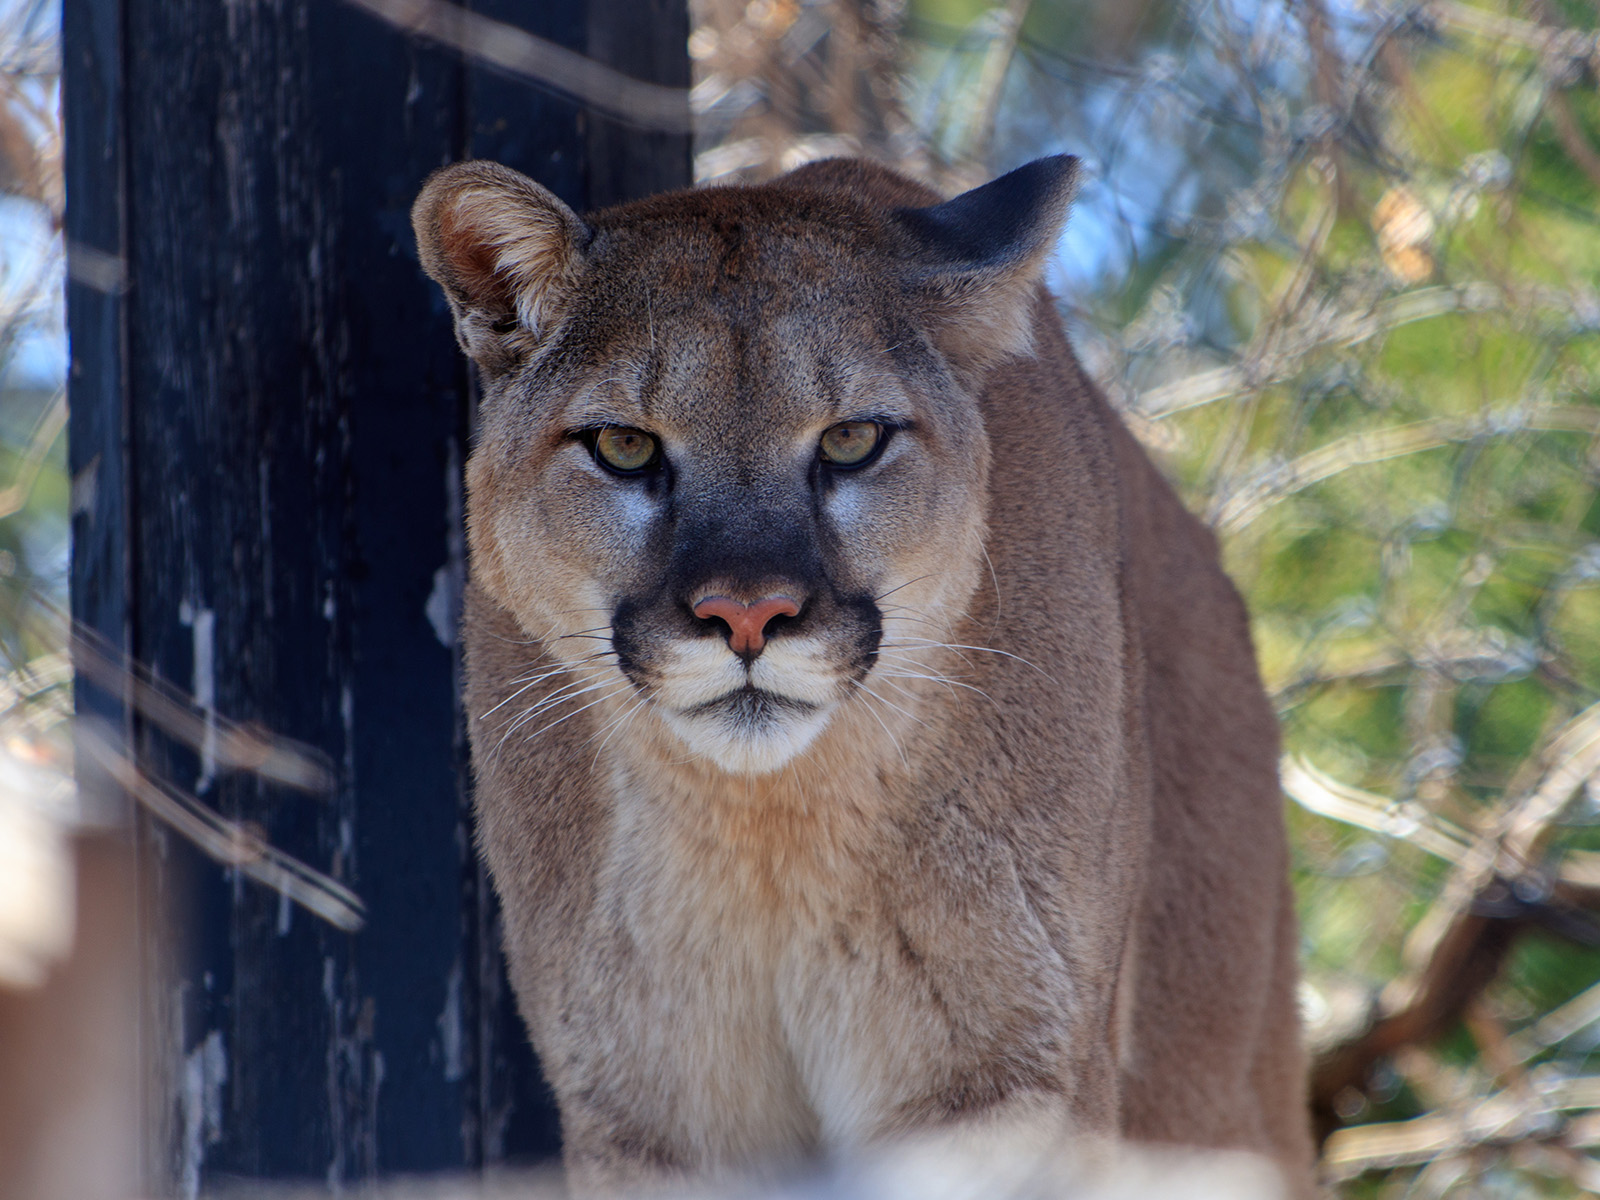 close up of a cougar looking directly at the camera